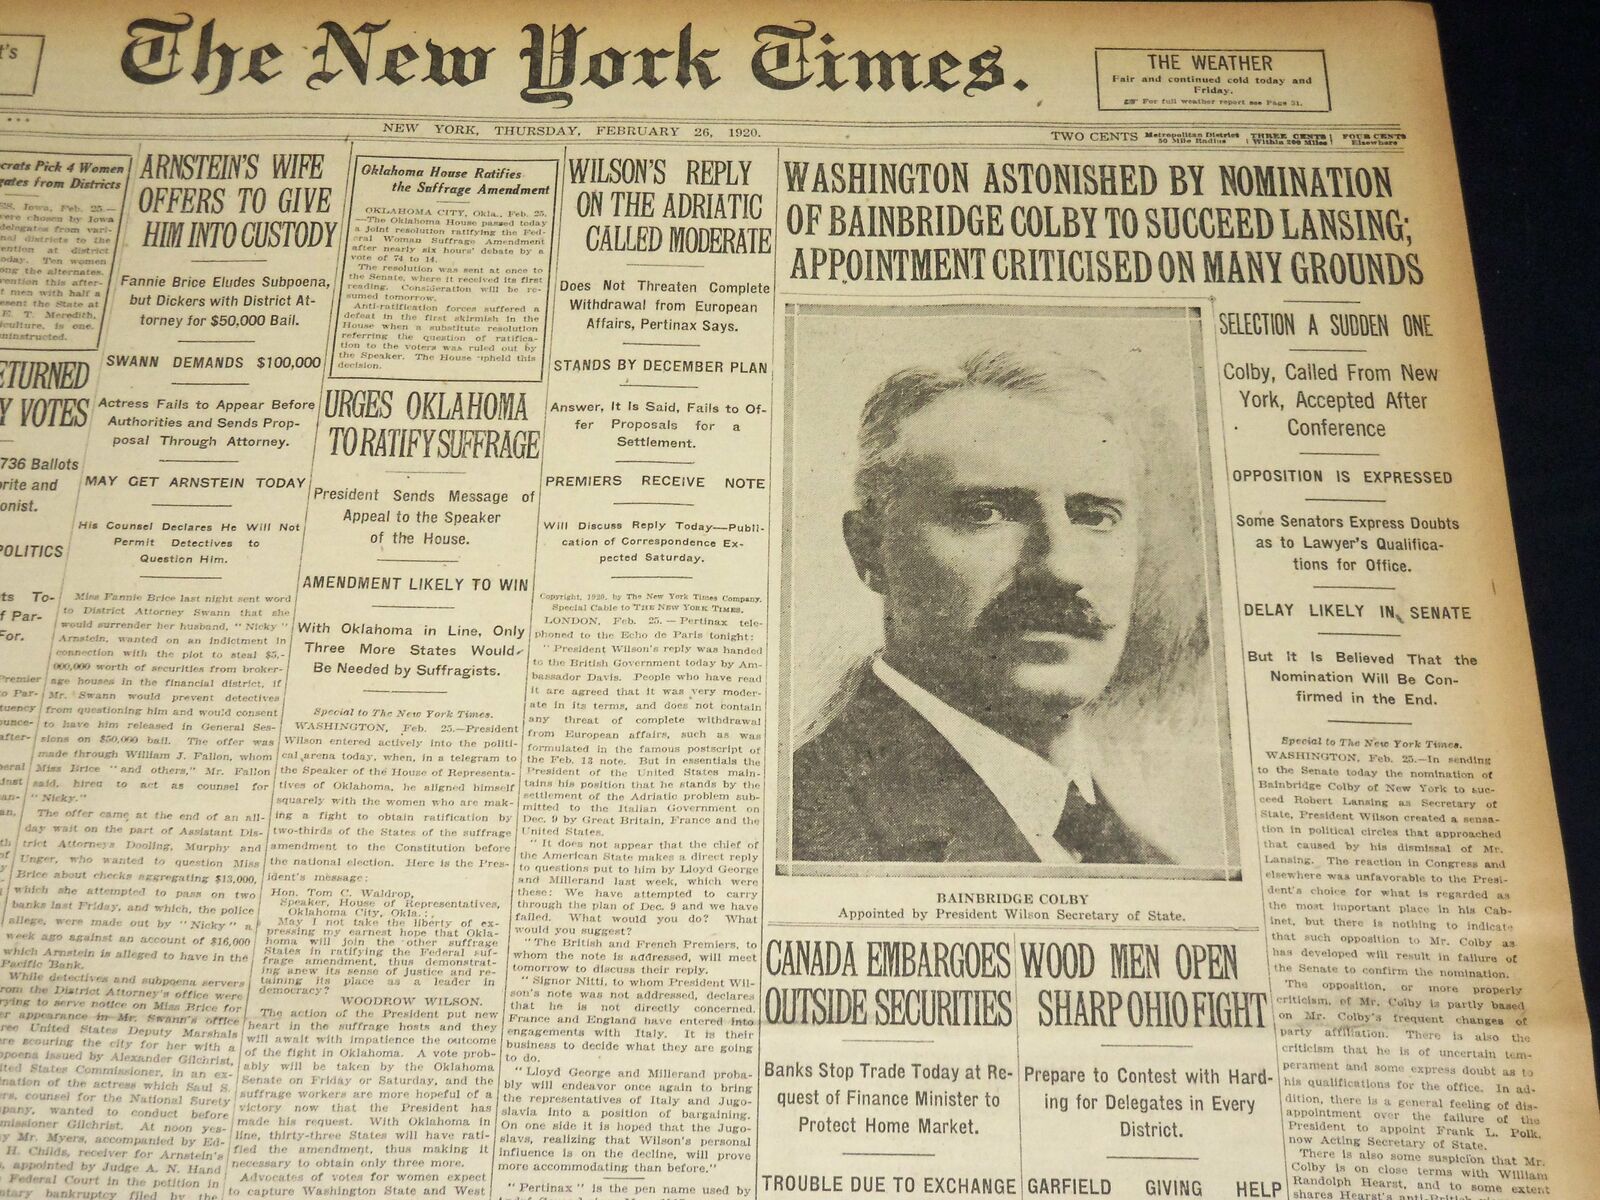 1920 FEBRUARY 26 NEW YORK TIMES - BAINBRIDGE COLBY TO SUCCEED LANSING - NT 7876